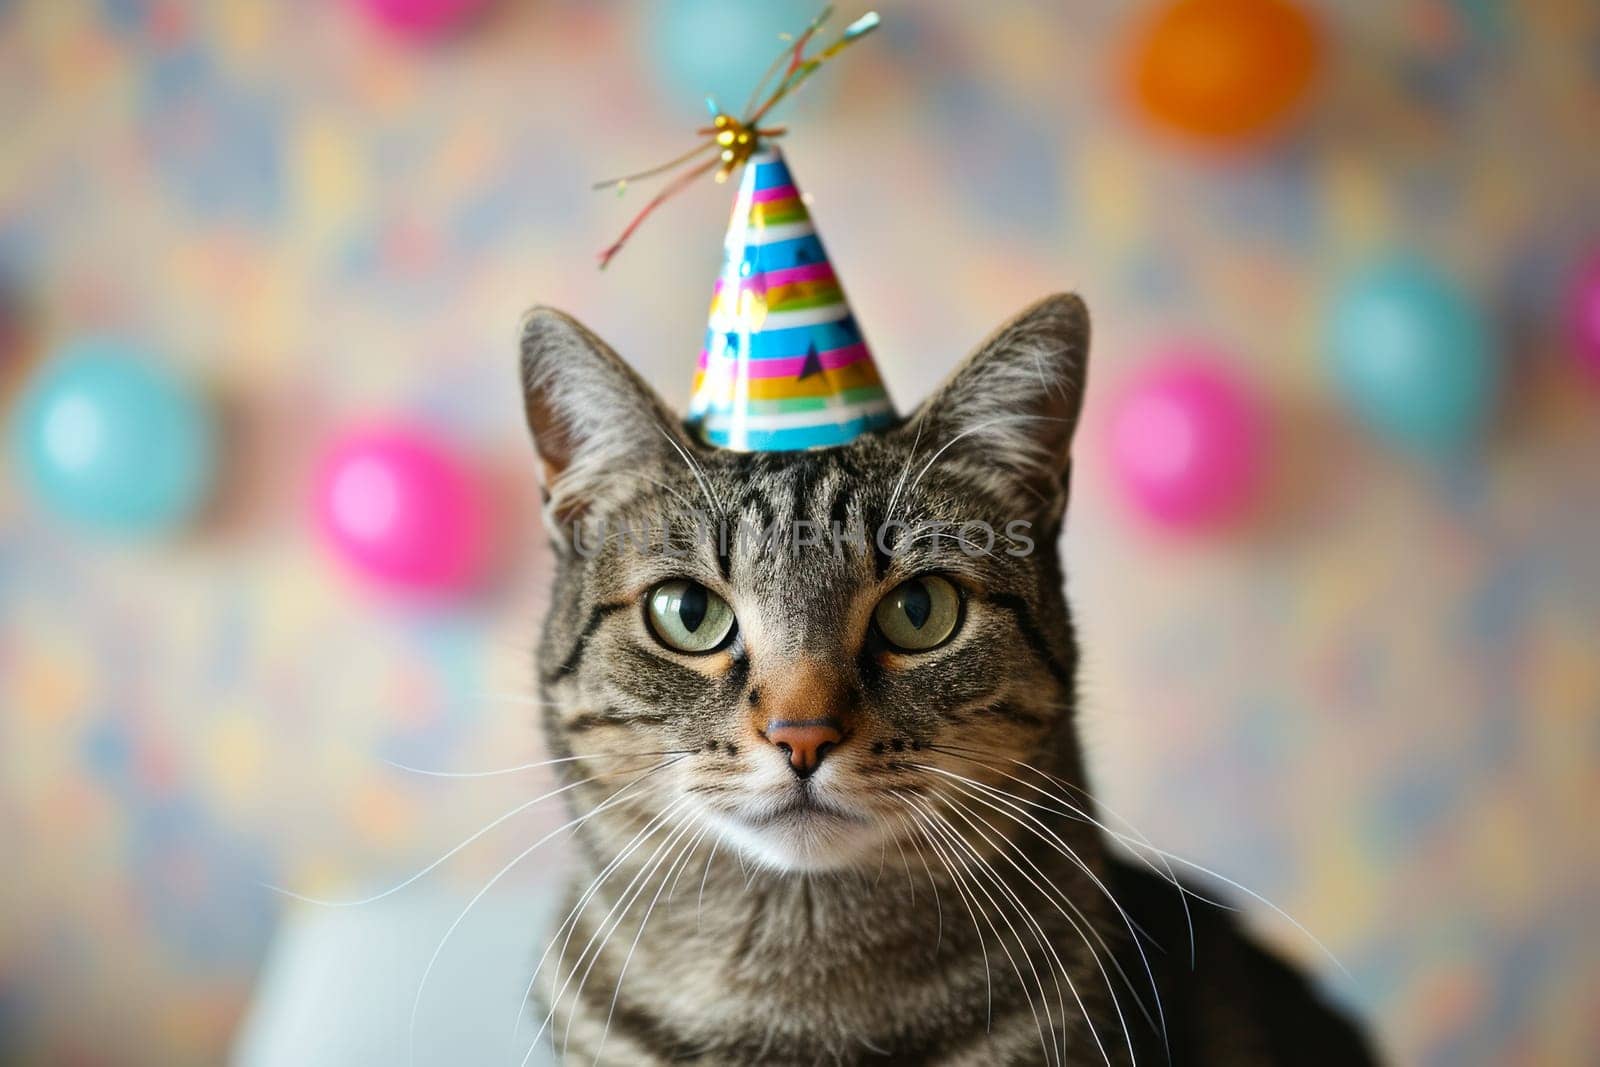 A cat wearing a colorful party hat on its head, set against a bright background.